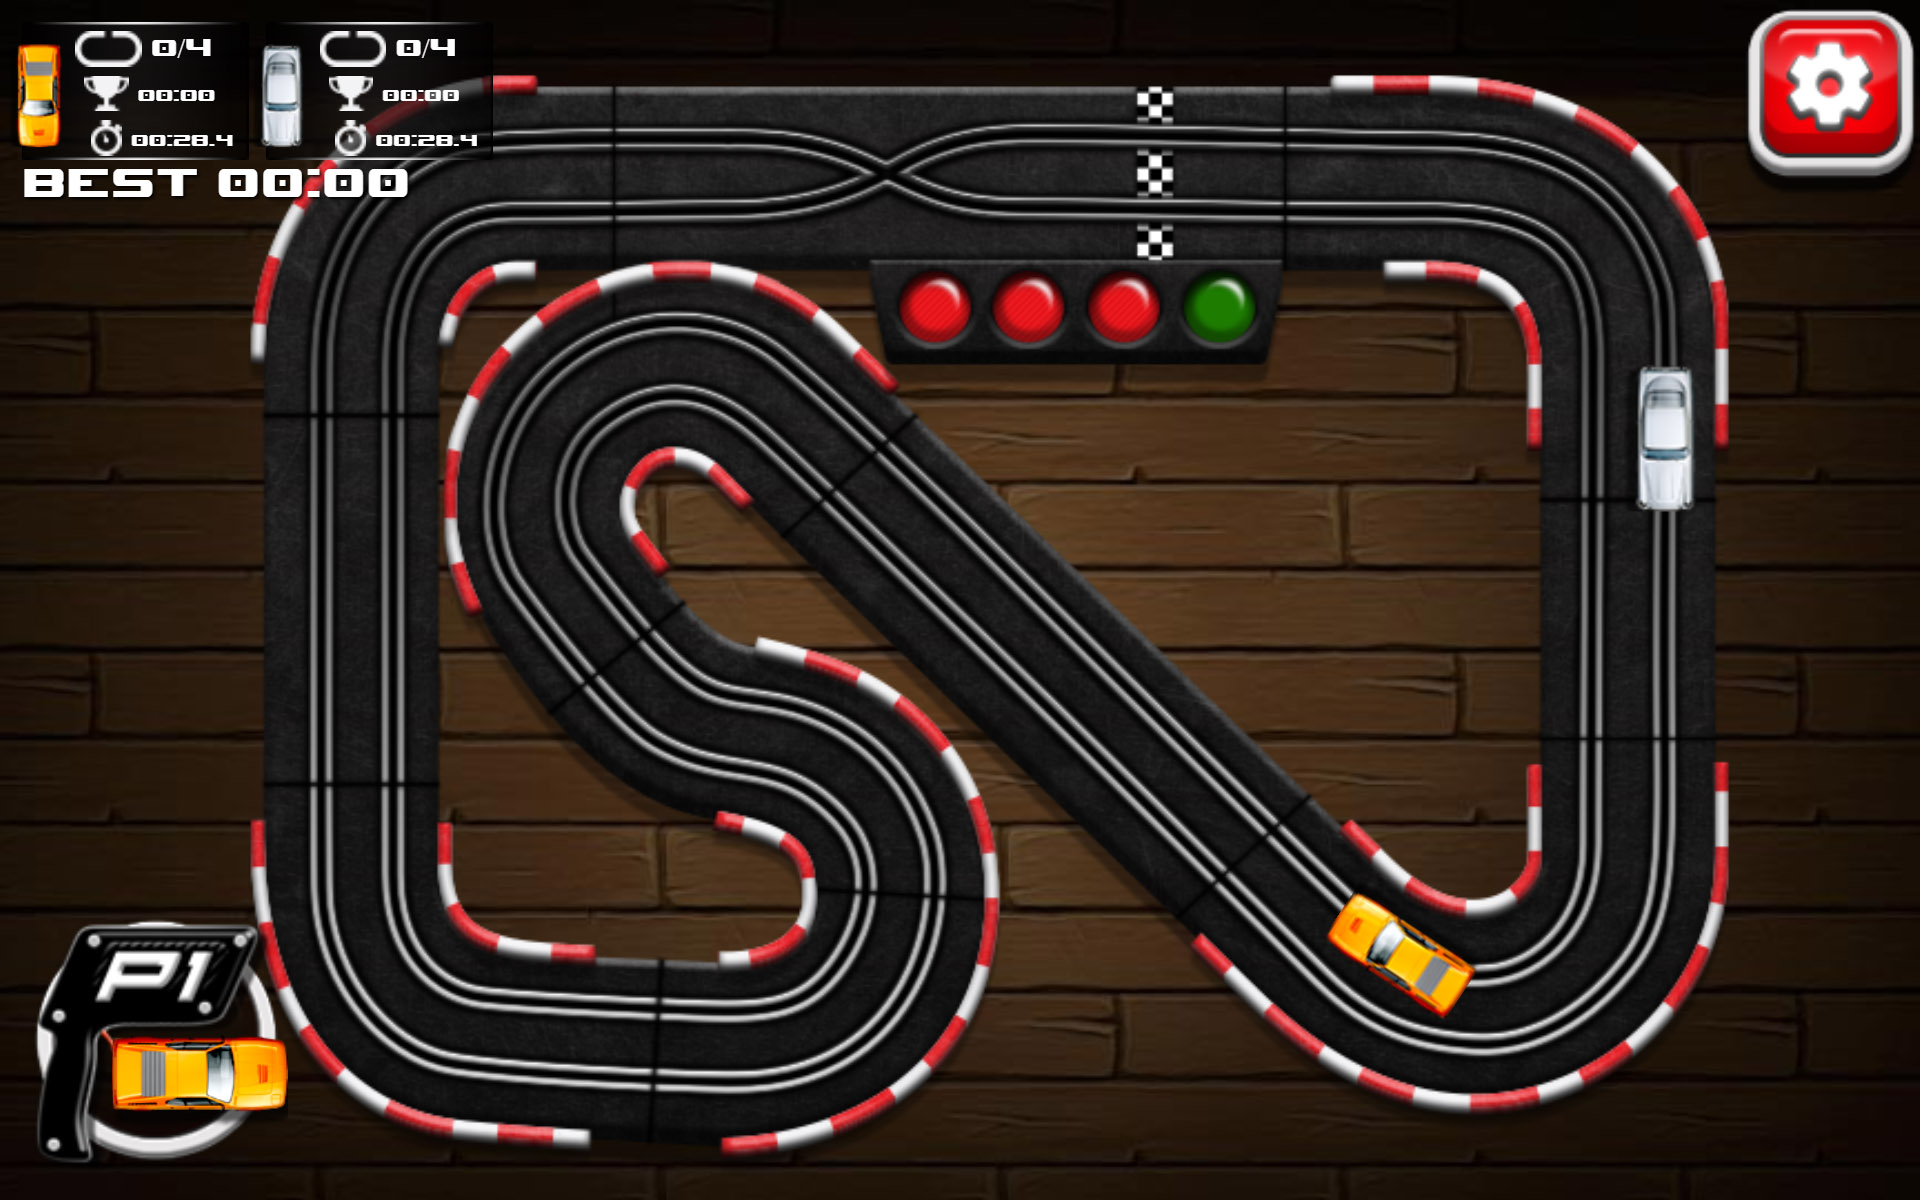 race car track game